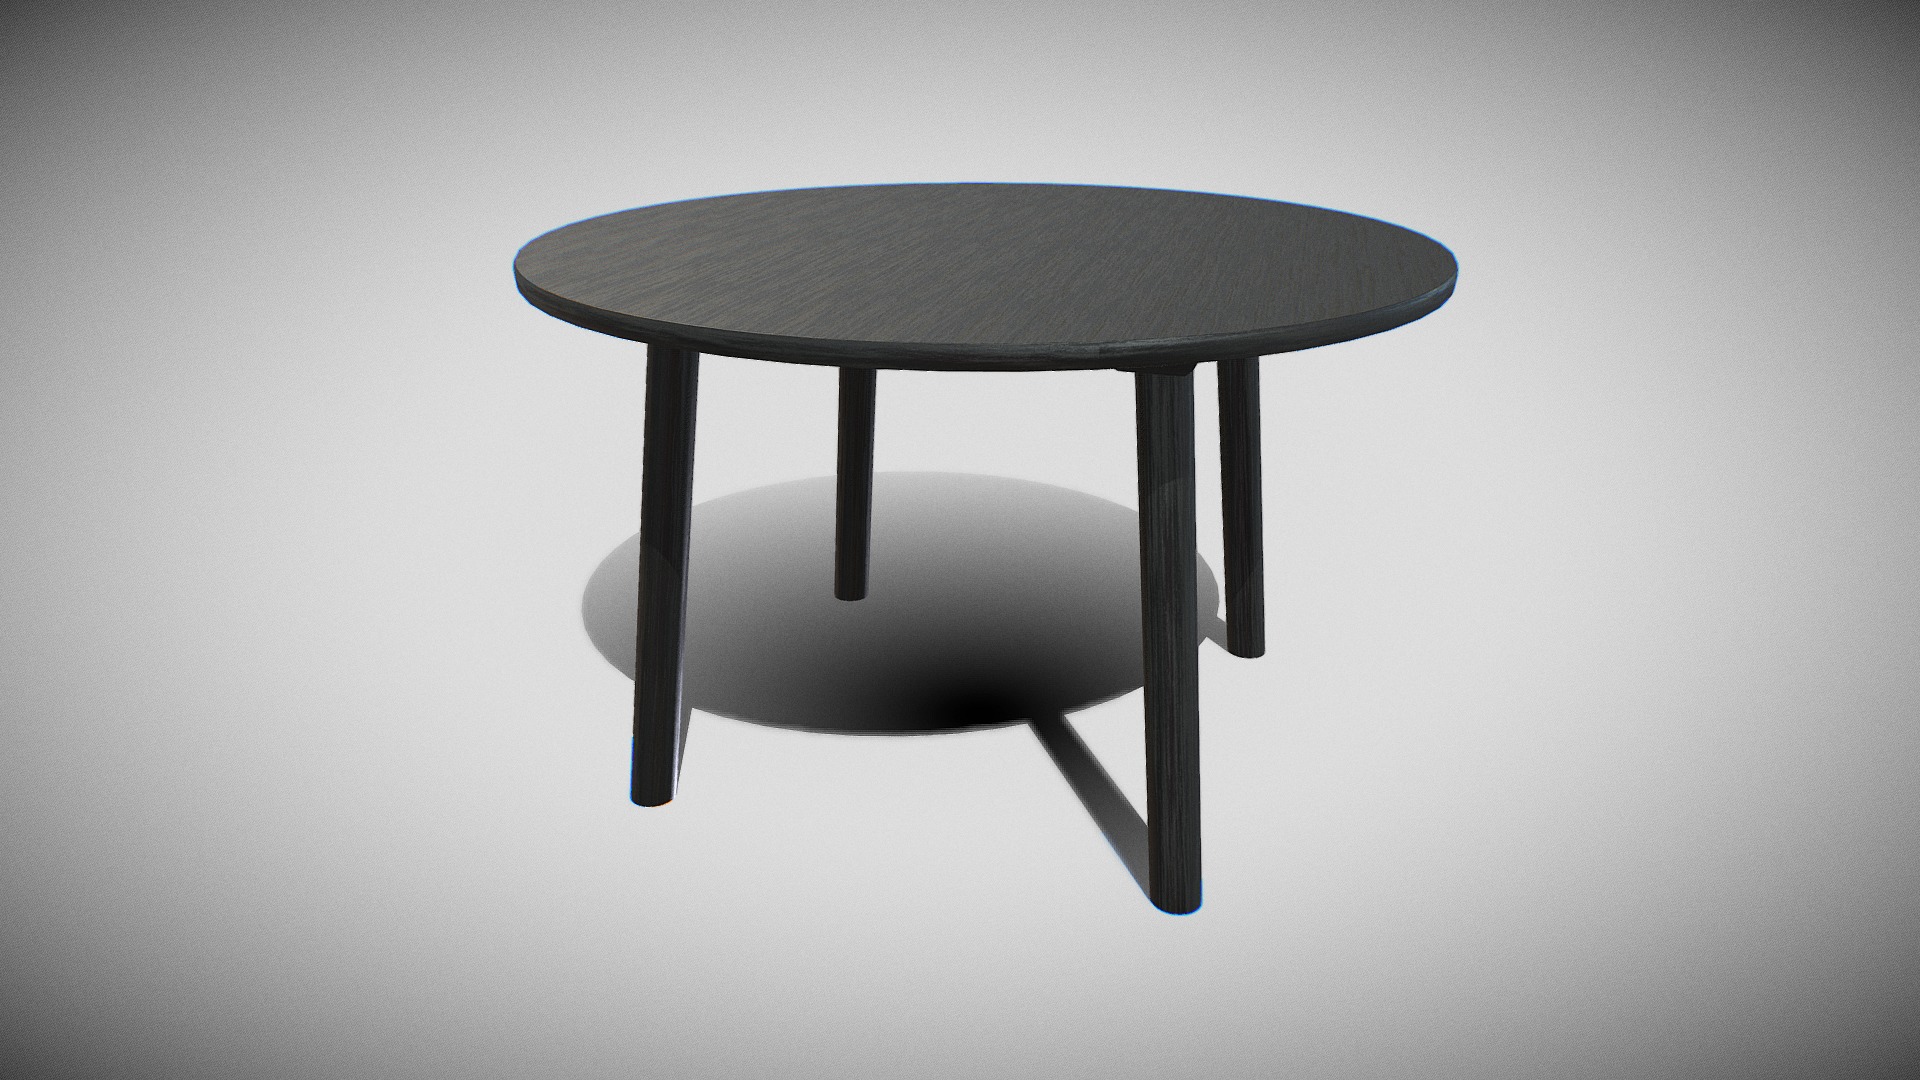 3D model TARO TABLE-Model 6121-Black ash wood - This is a 3D model of the TARO TABLE-Model 6121-Black ash wood. The 3D model is about a table with a chair.